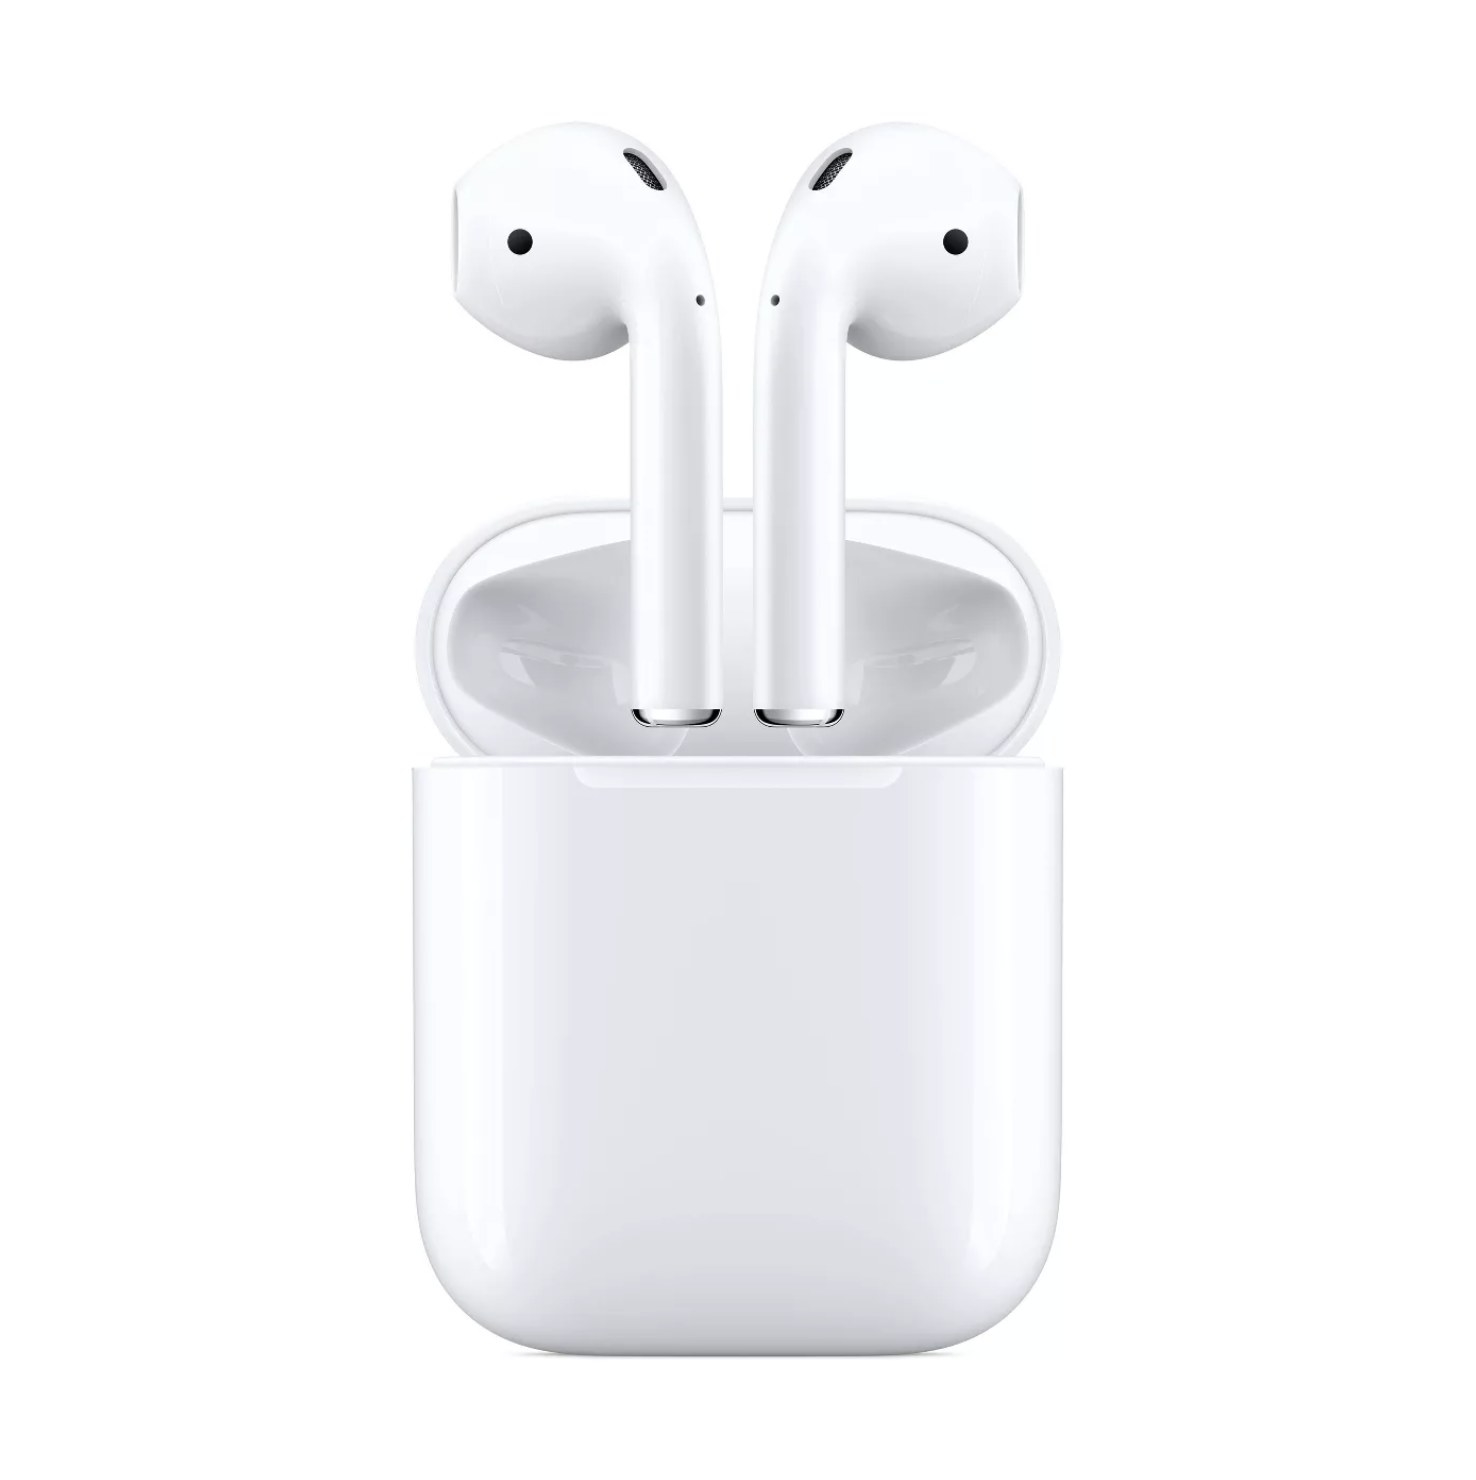 White Apple Airpods coming out of the charging case